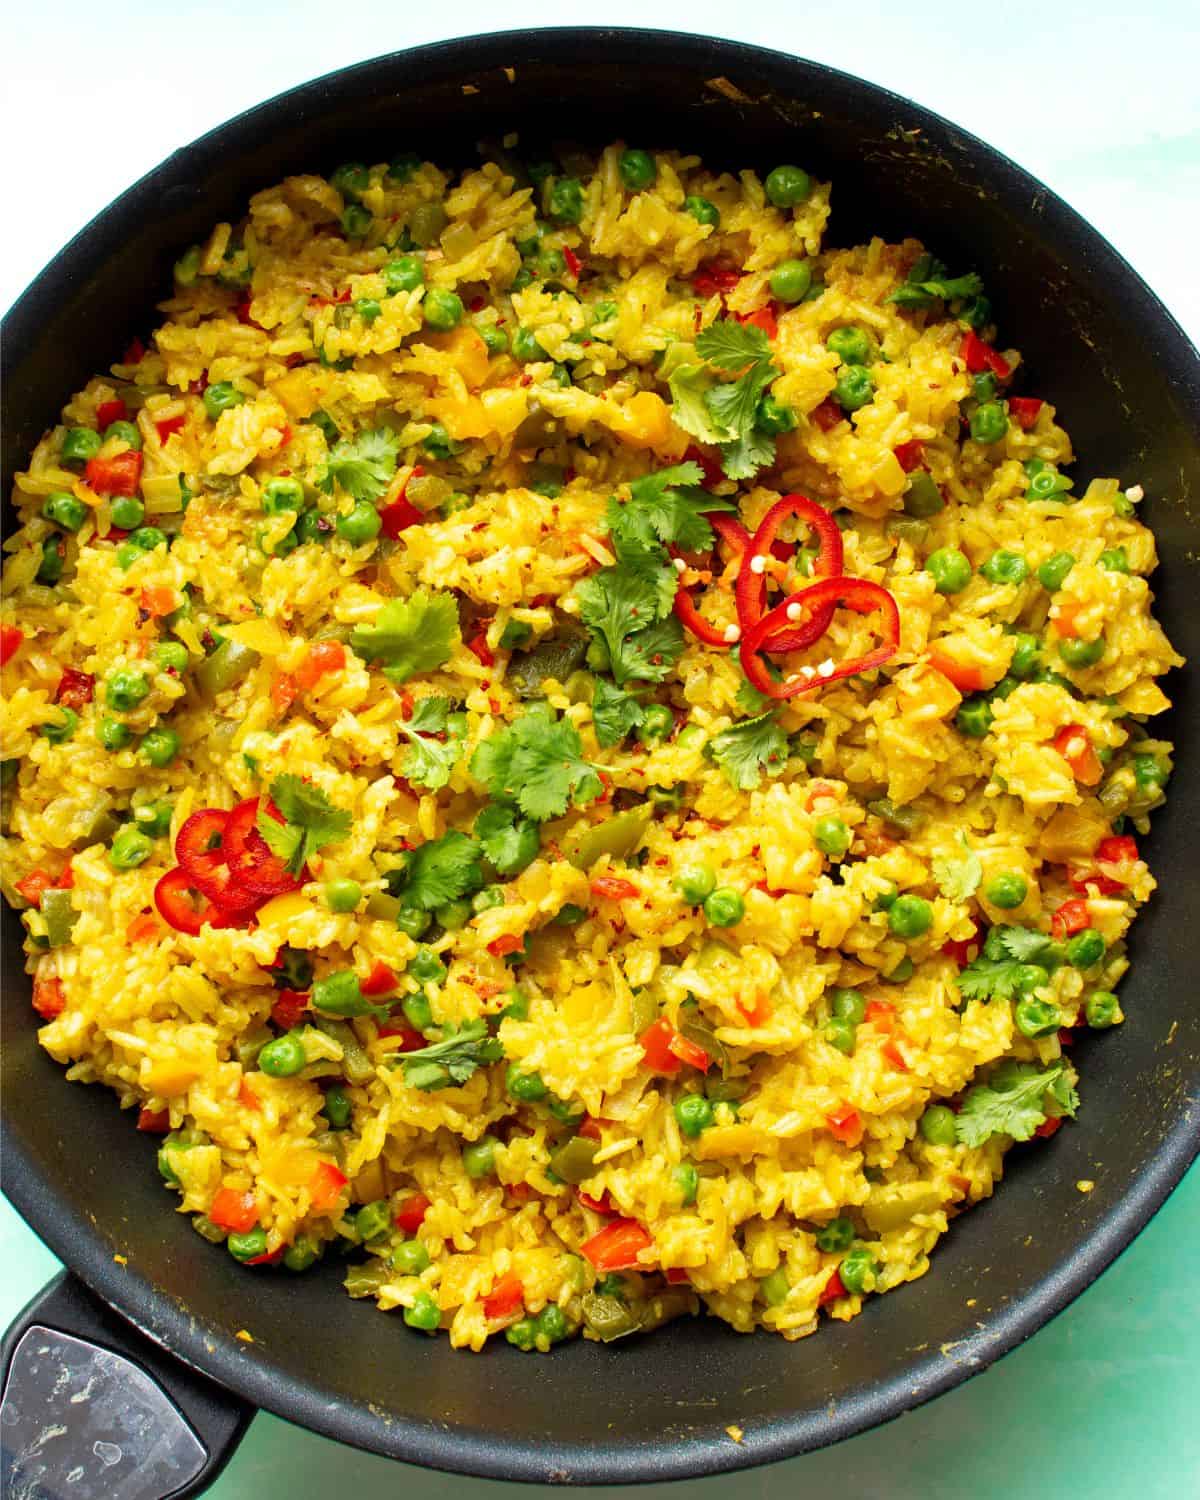 Nando's spicy rice topped with fresh cred chilli slices and coriander.